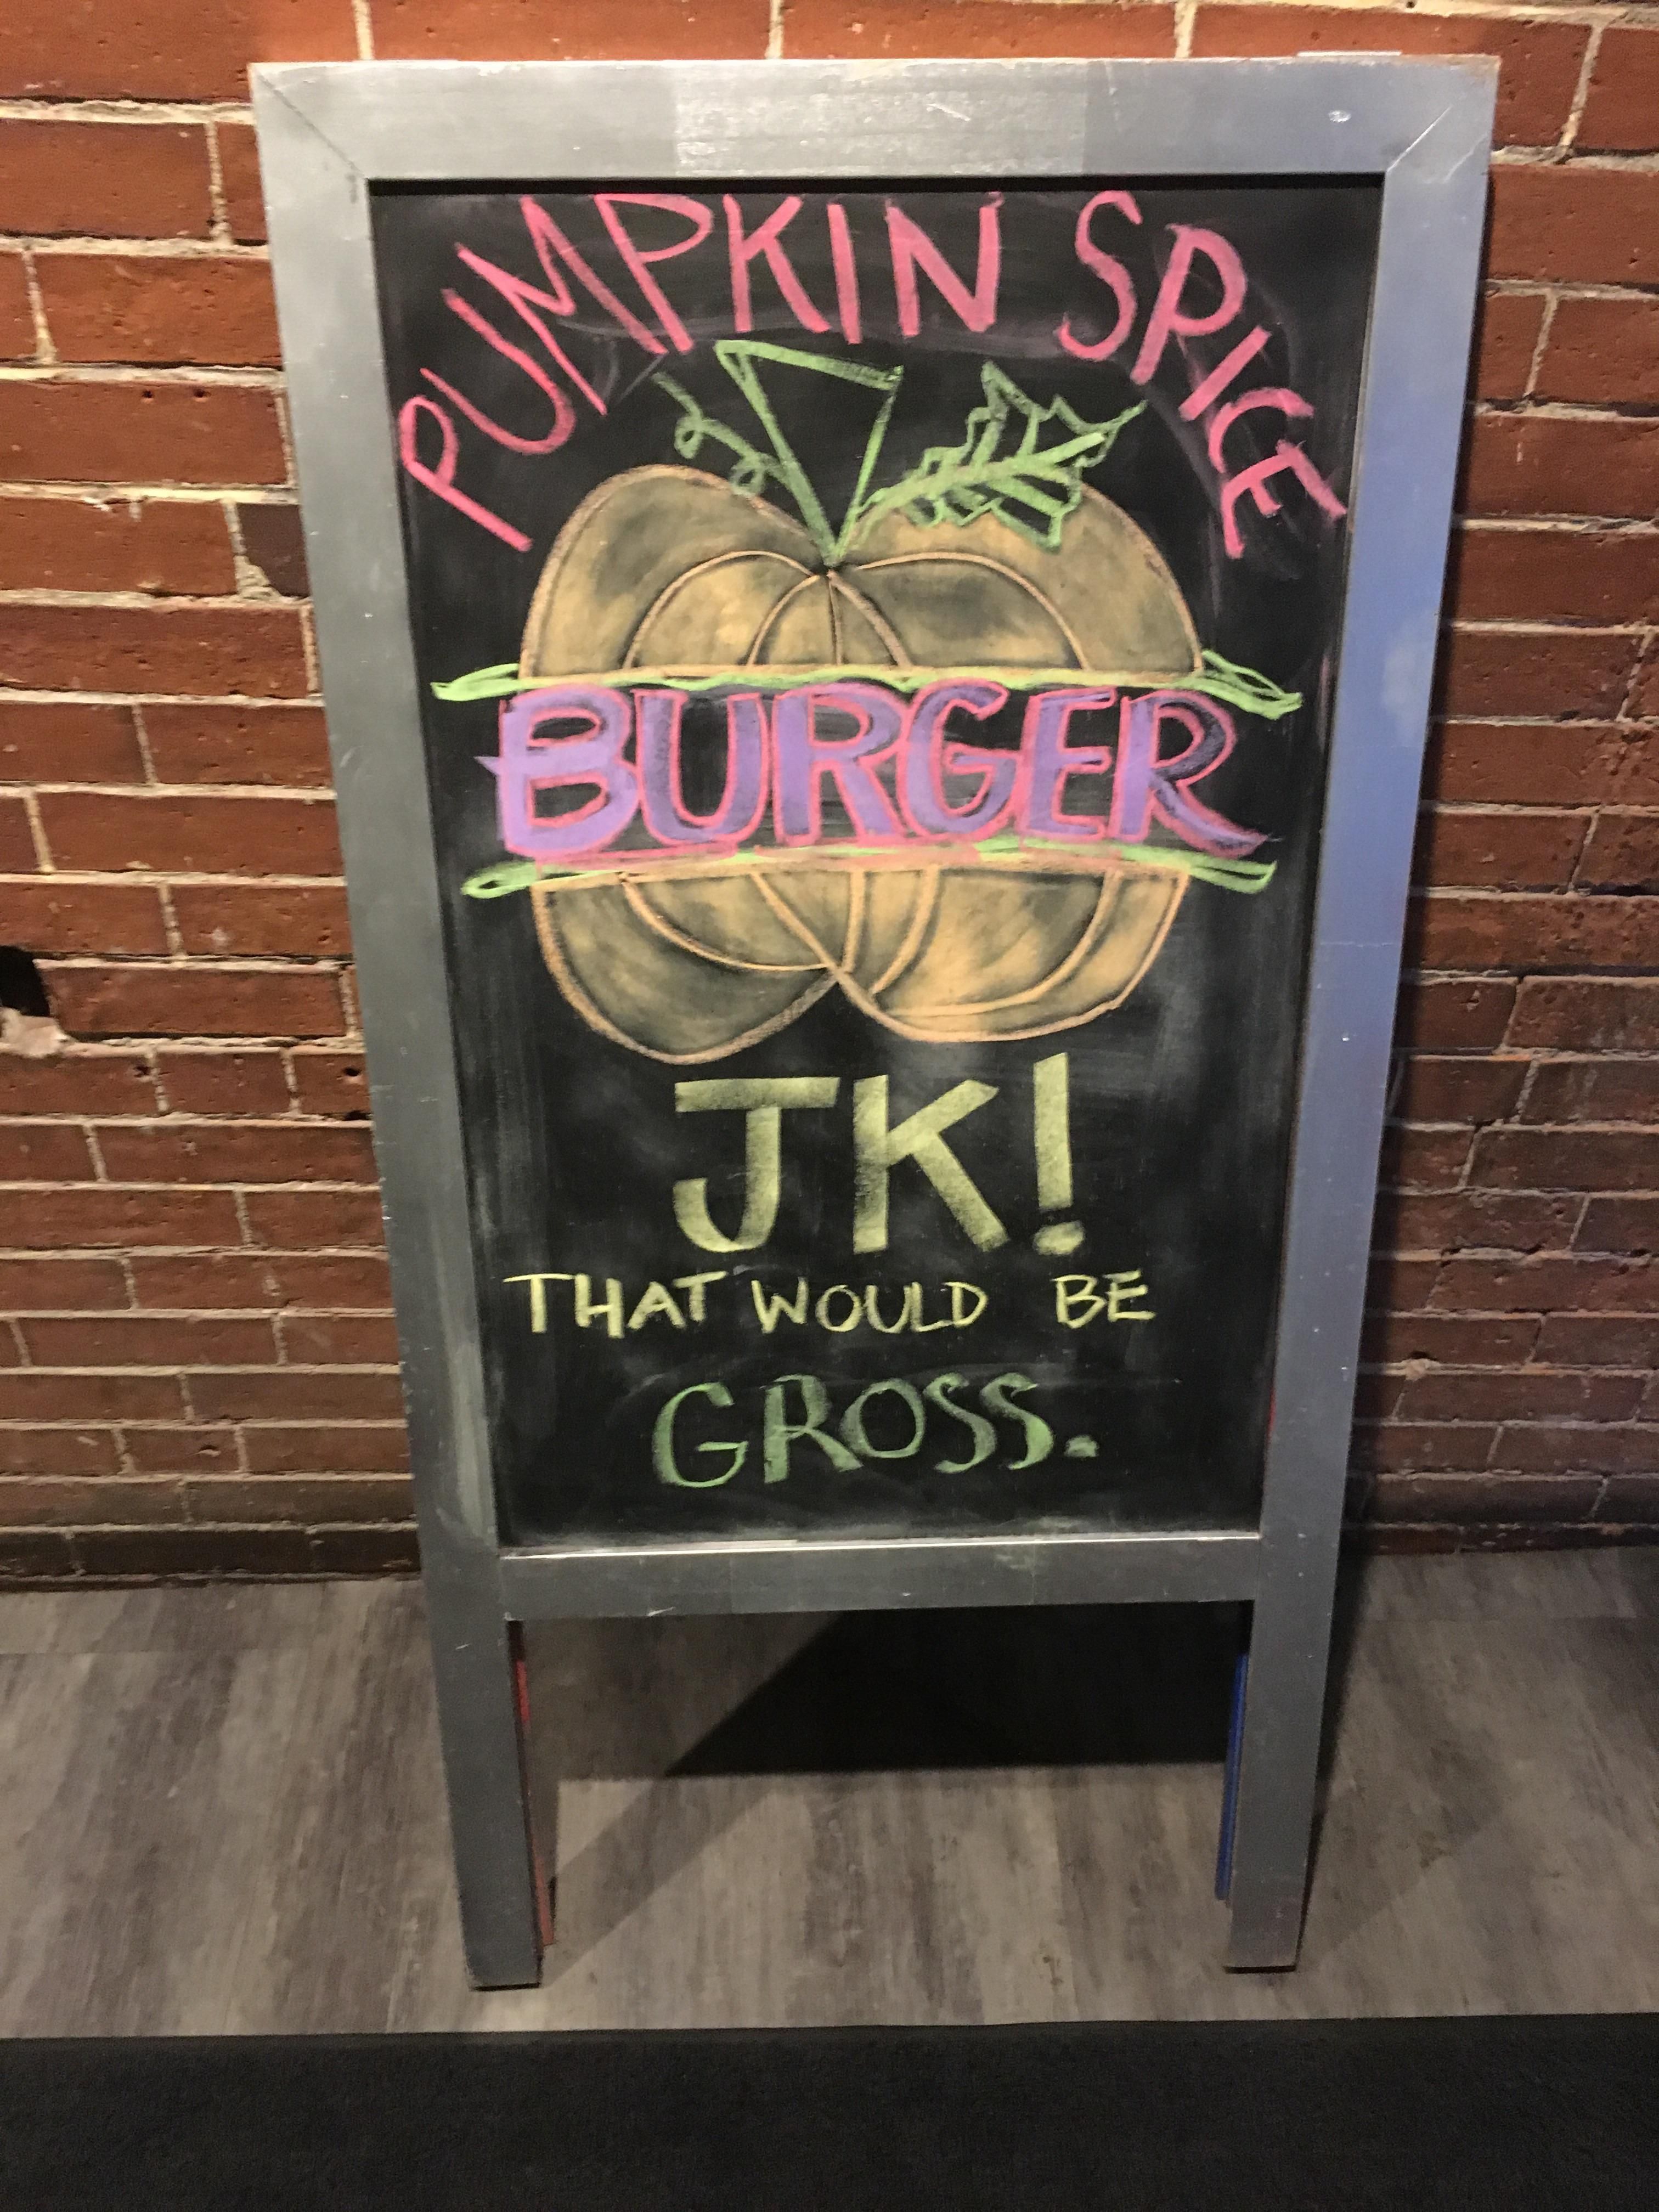 A restaurant in Maine gets it.